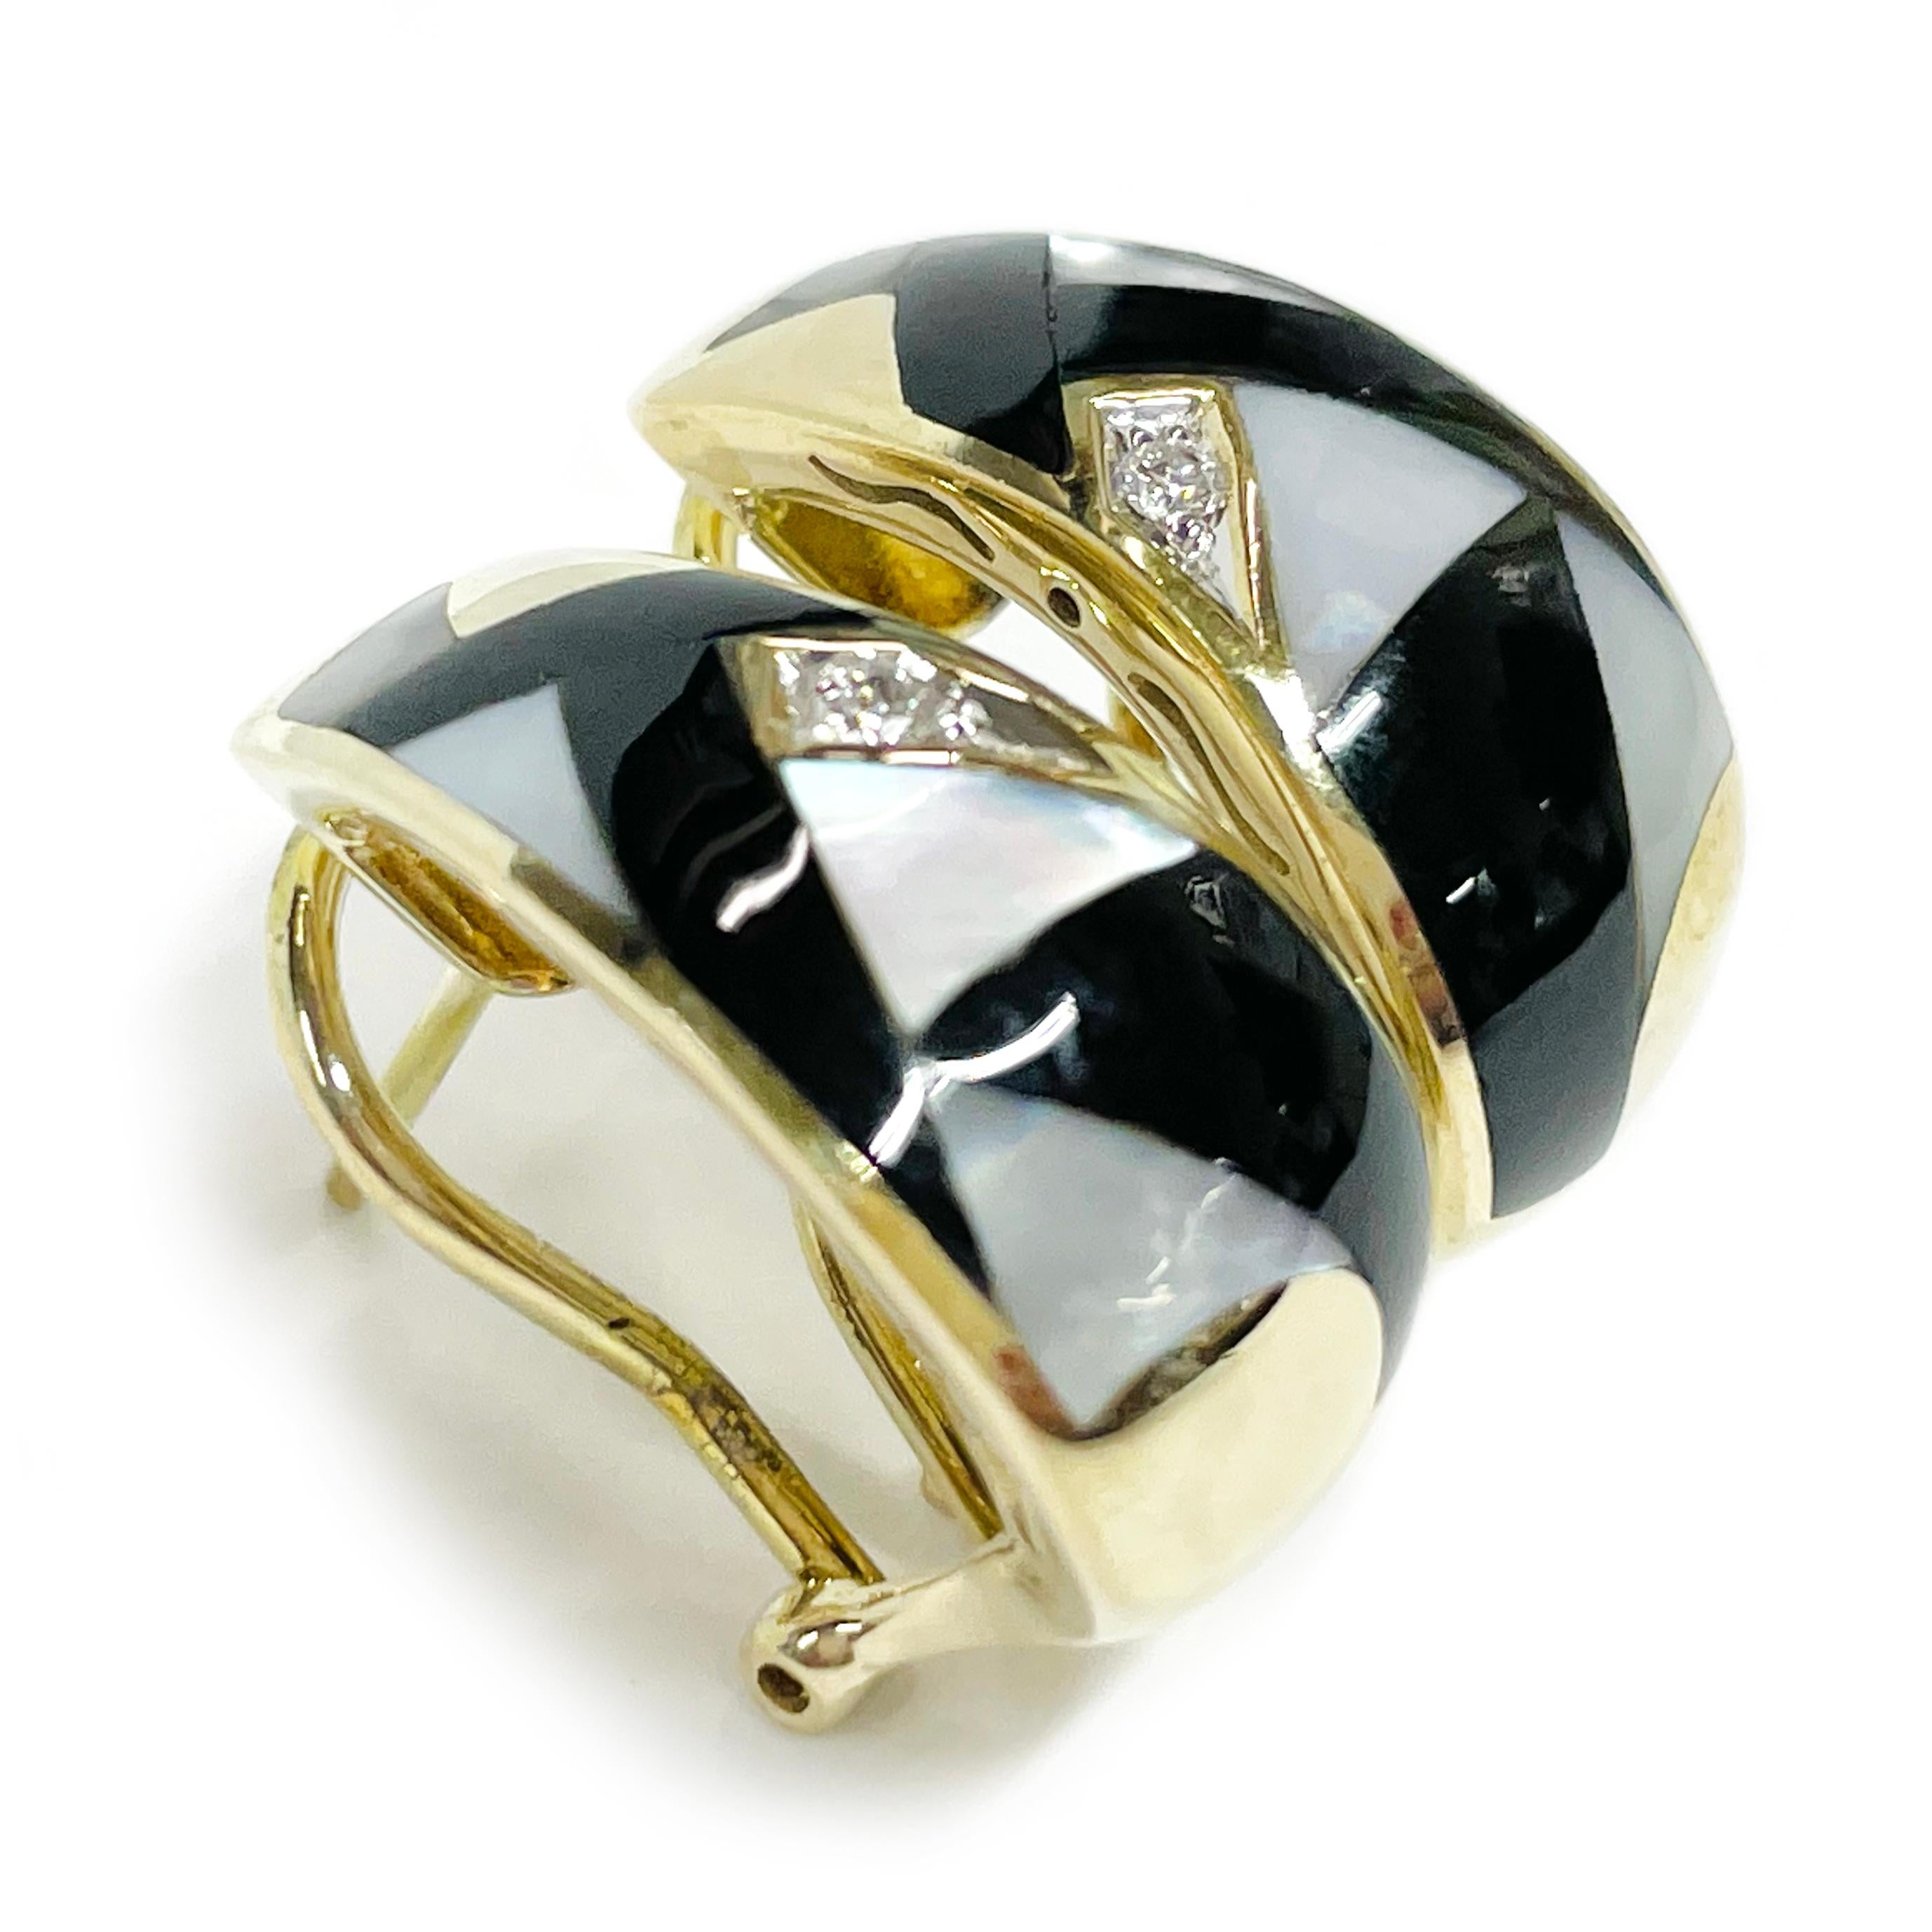 Asch Grossbardt 14K Yellow Gold Diamond, Mother of Pearl, Onyx Earrings. The earrings feature geometric shapes of mother of pearl and onyx with gold trim and one bead-set round diamond on each earring. The 2mm diamonds are brilliant-cut and are